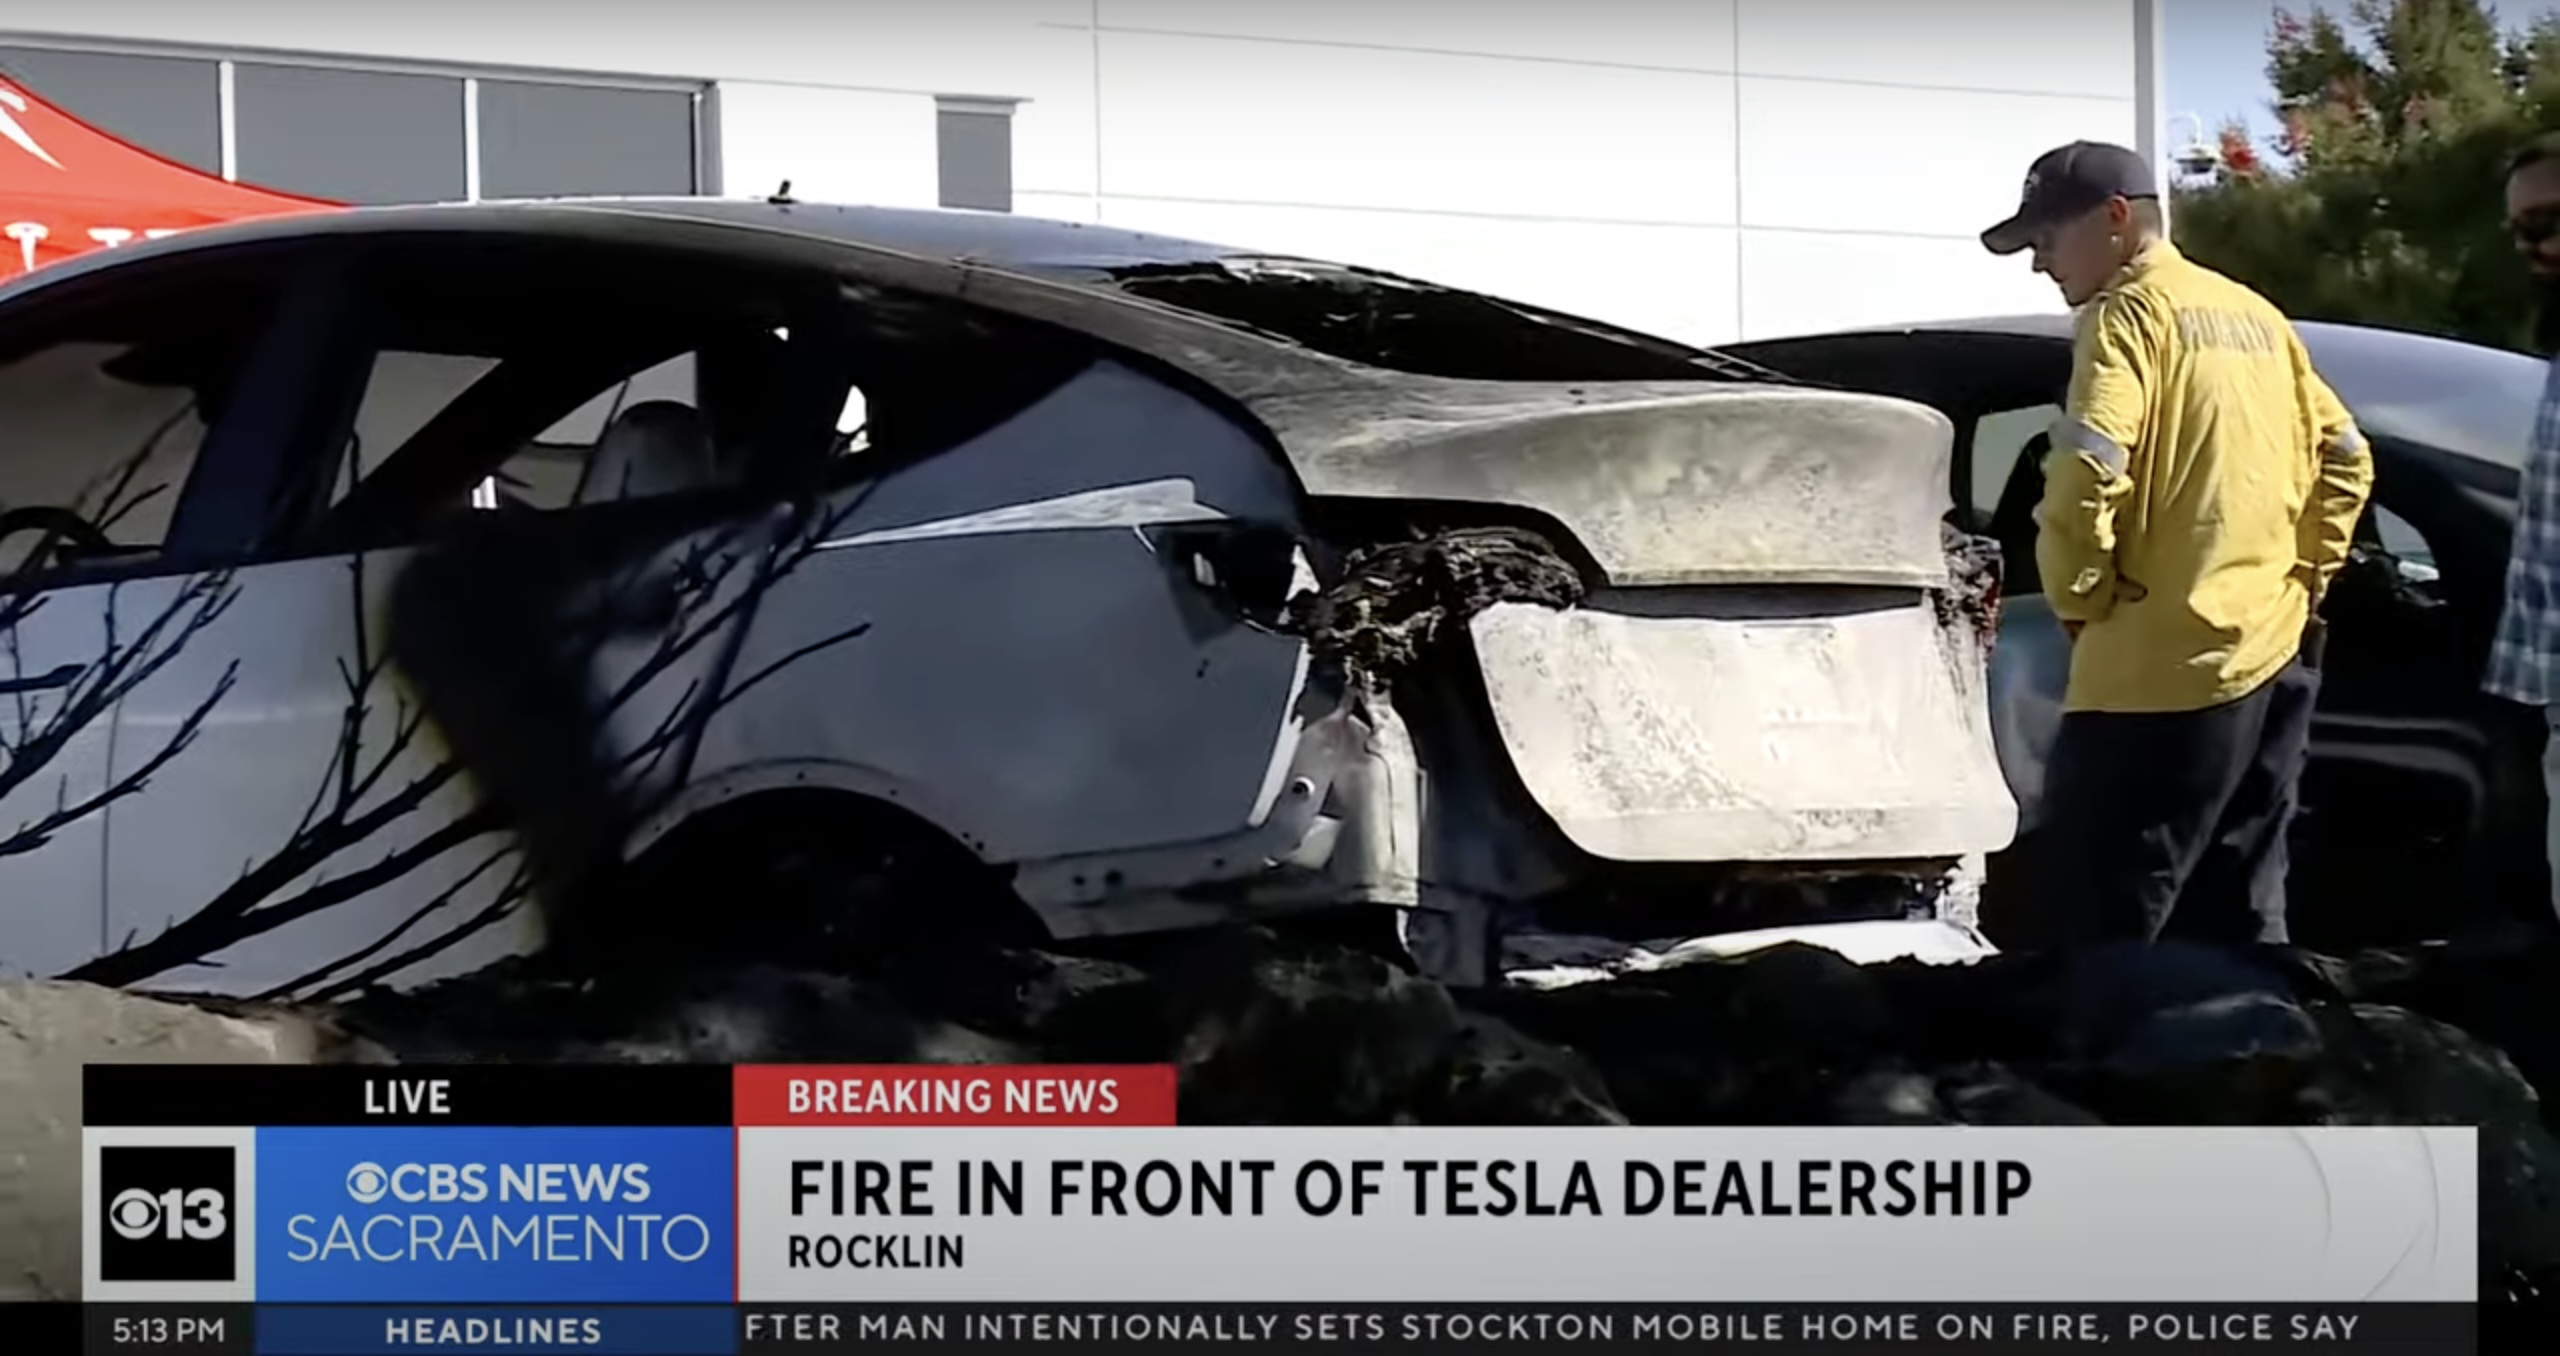 Tesla Community Makes Quick Work of Misleading Fire Report